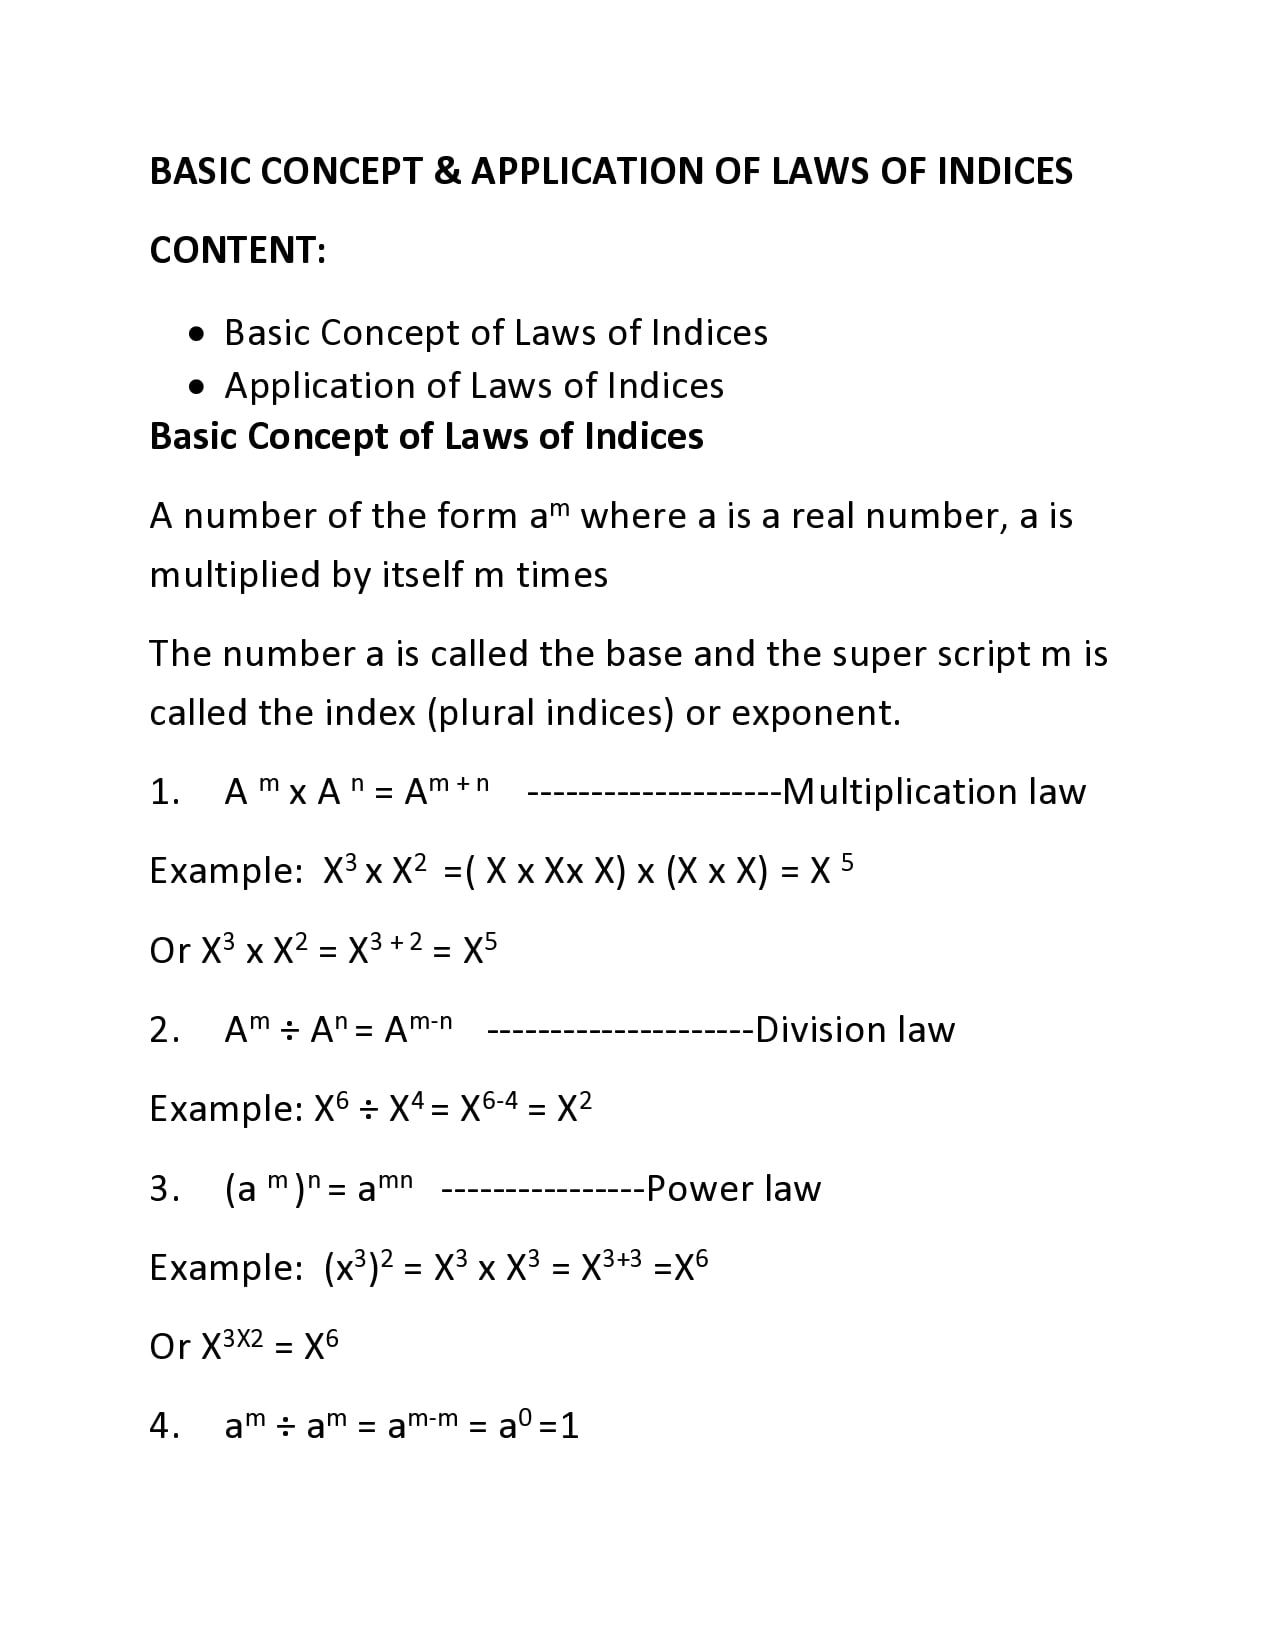 BASIC CONCEPT & APPLICATION OF LAWS OF INDICES